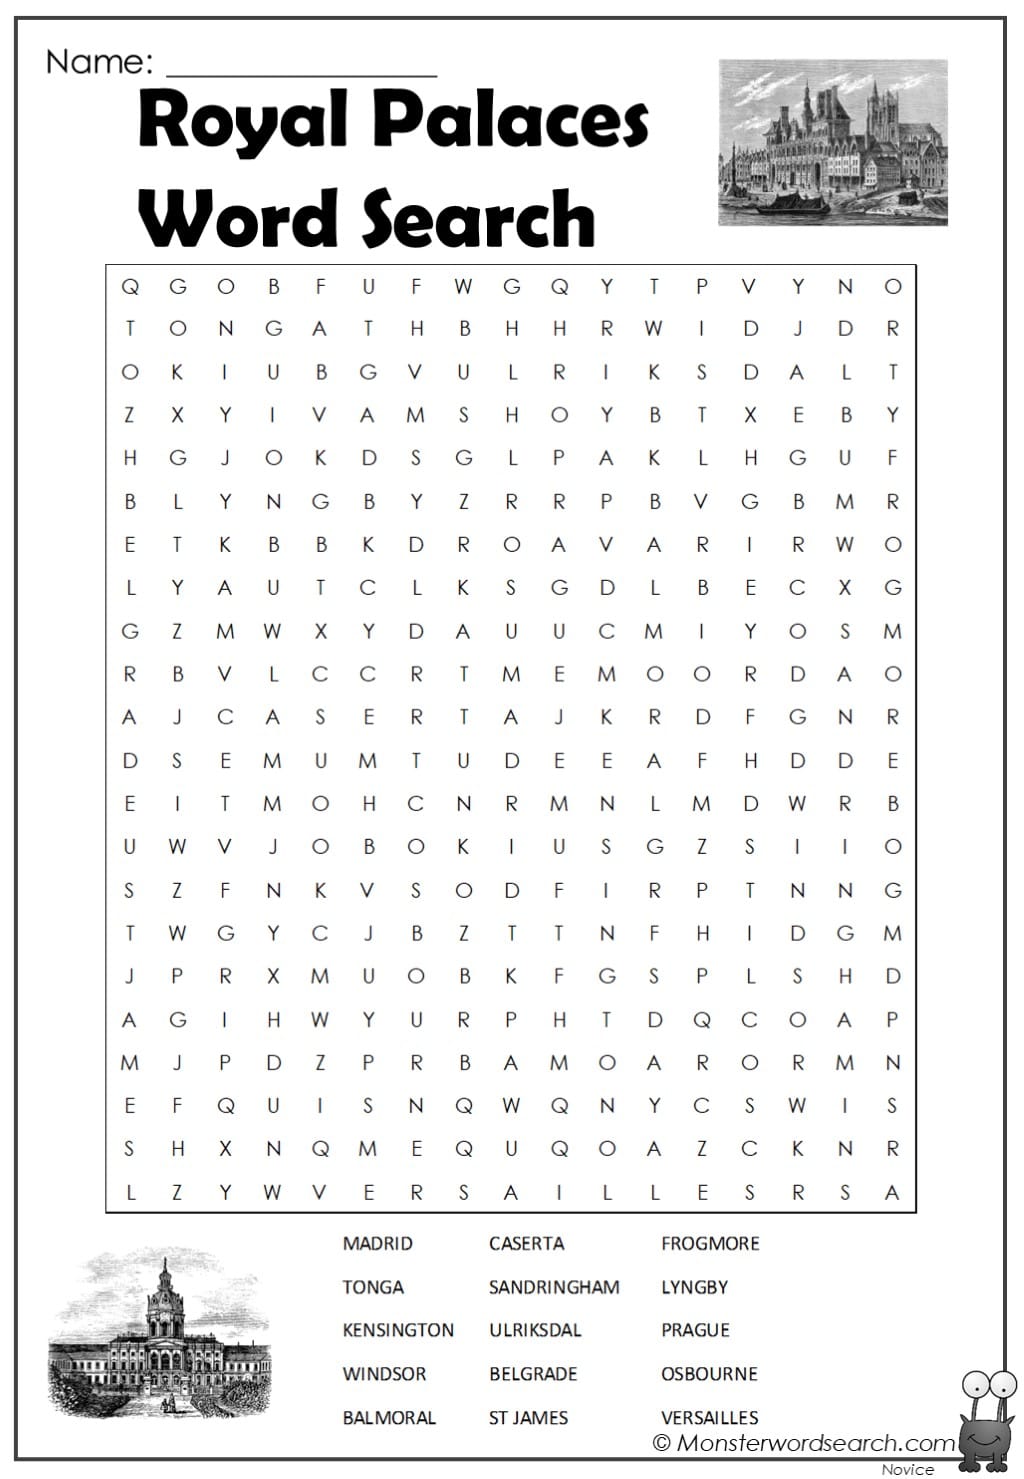 Royal Palaces Word Search